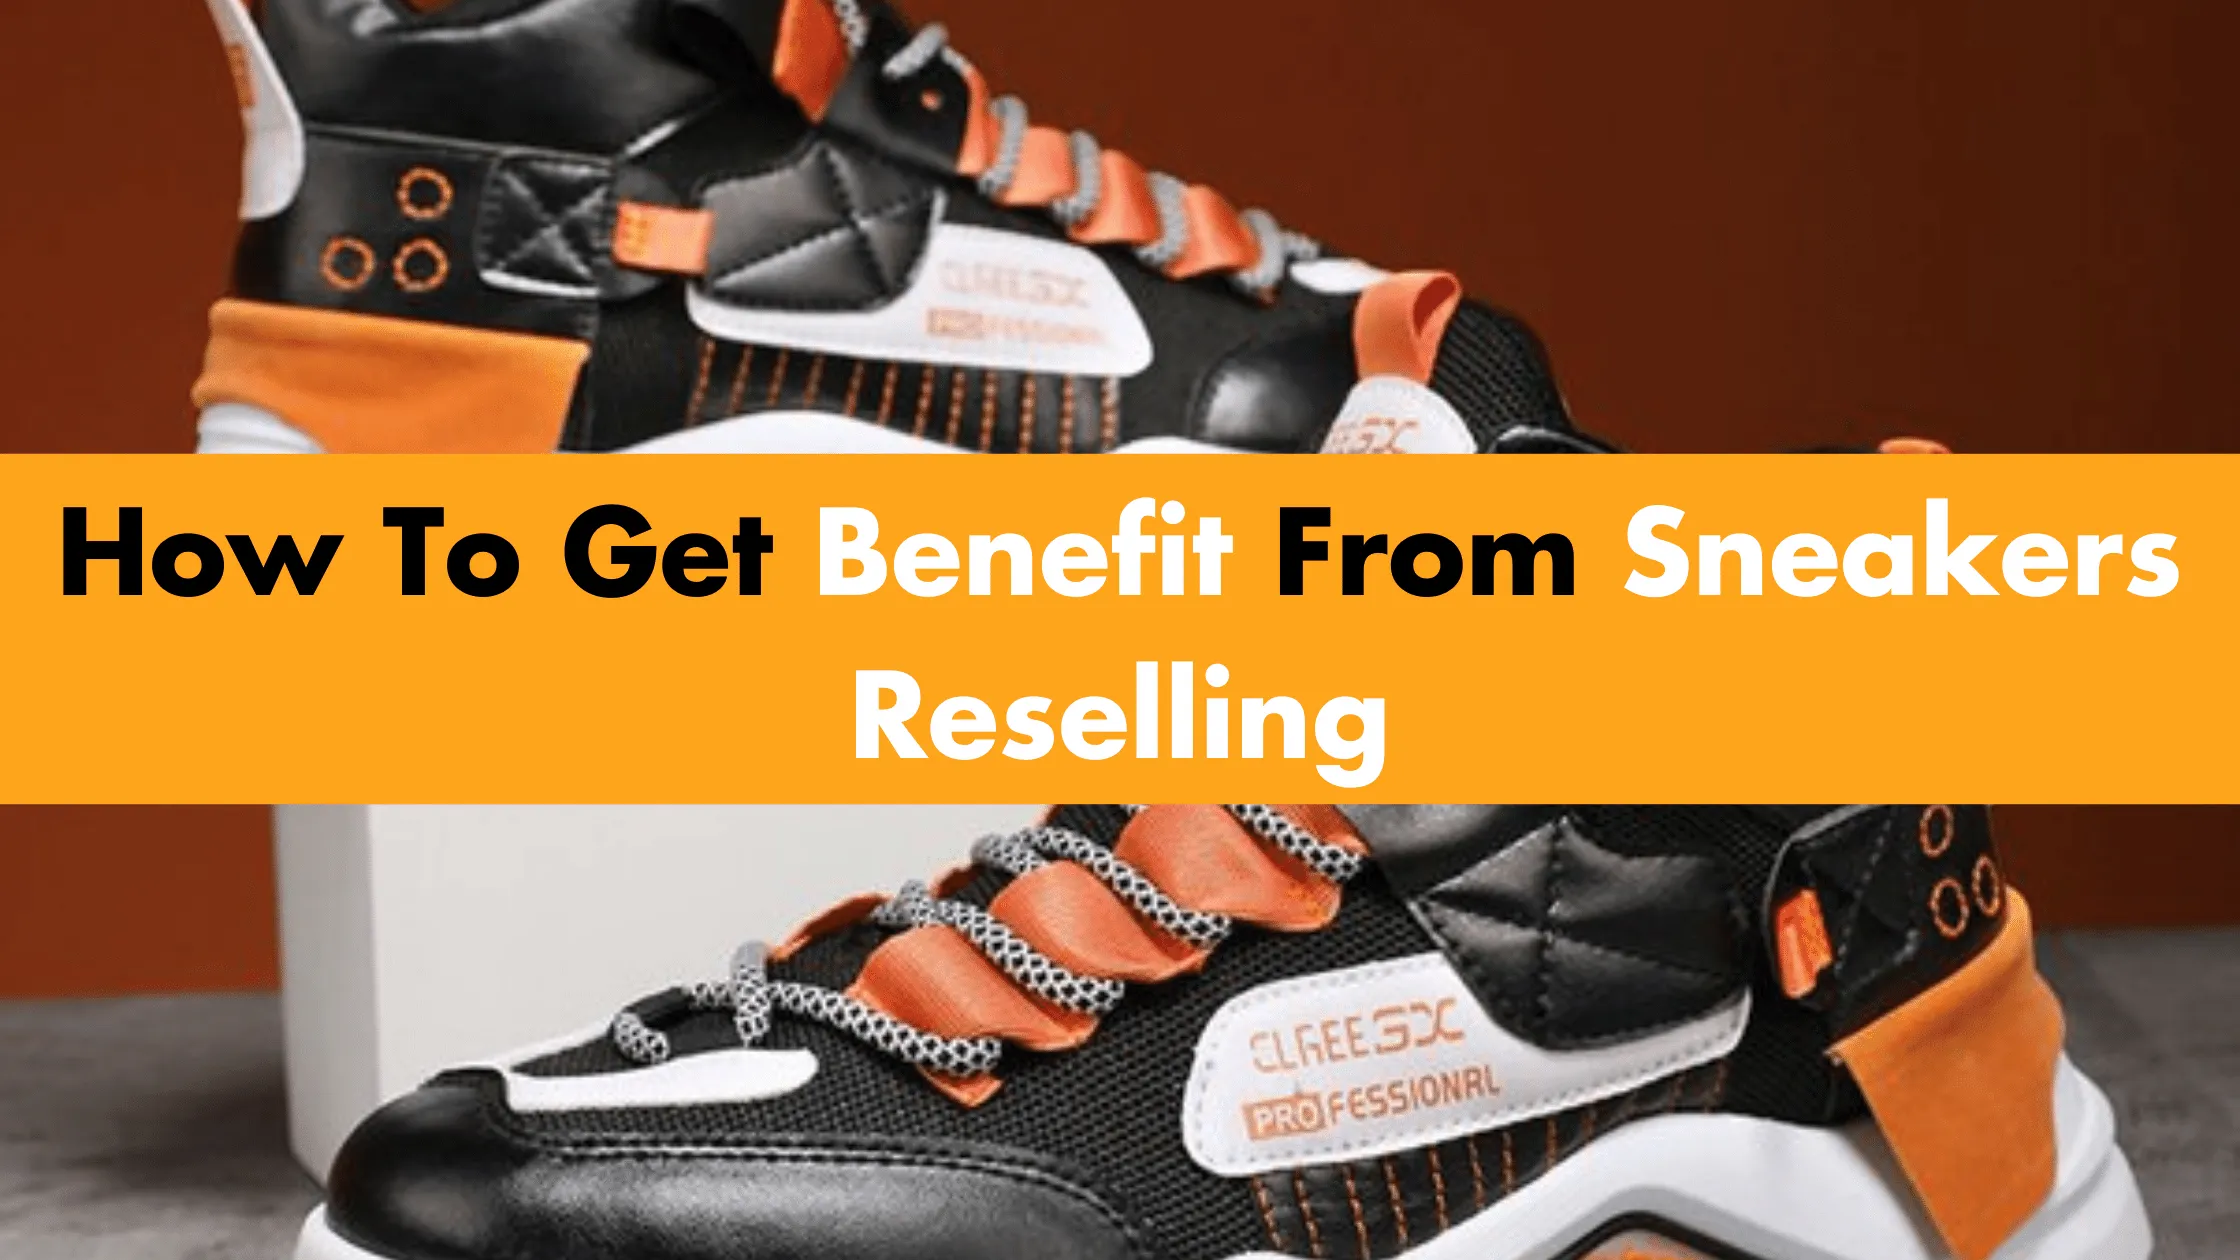 How To Get Benefit From Sneakers Reselling